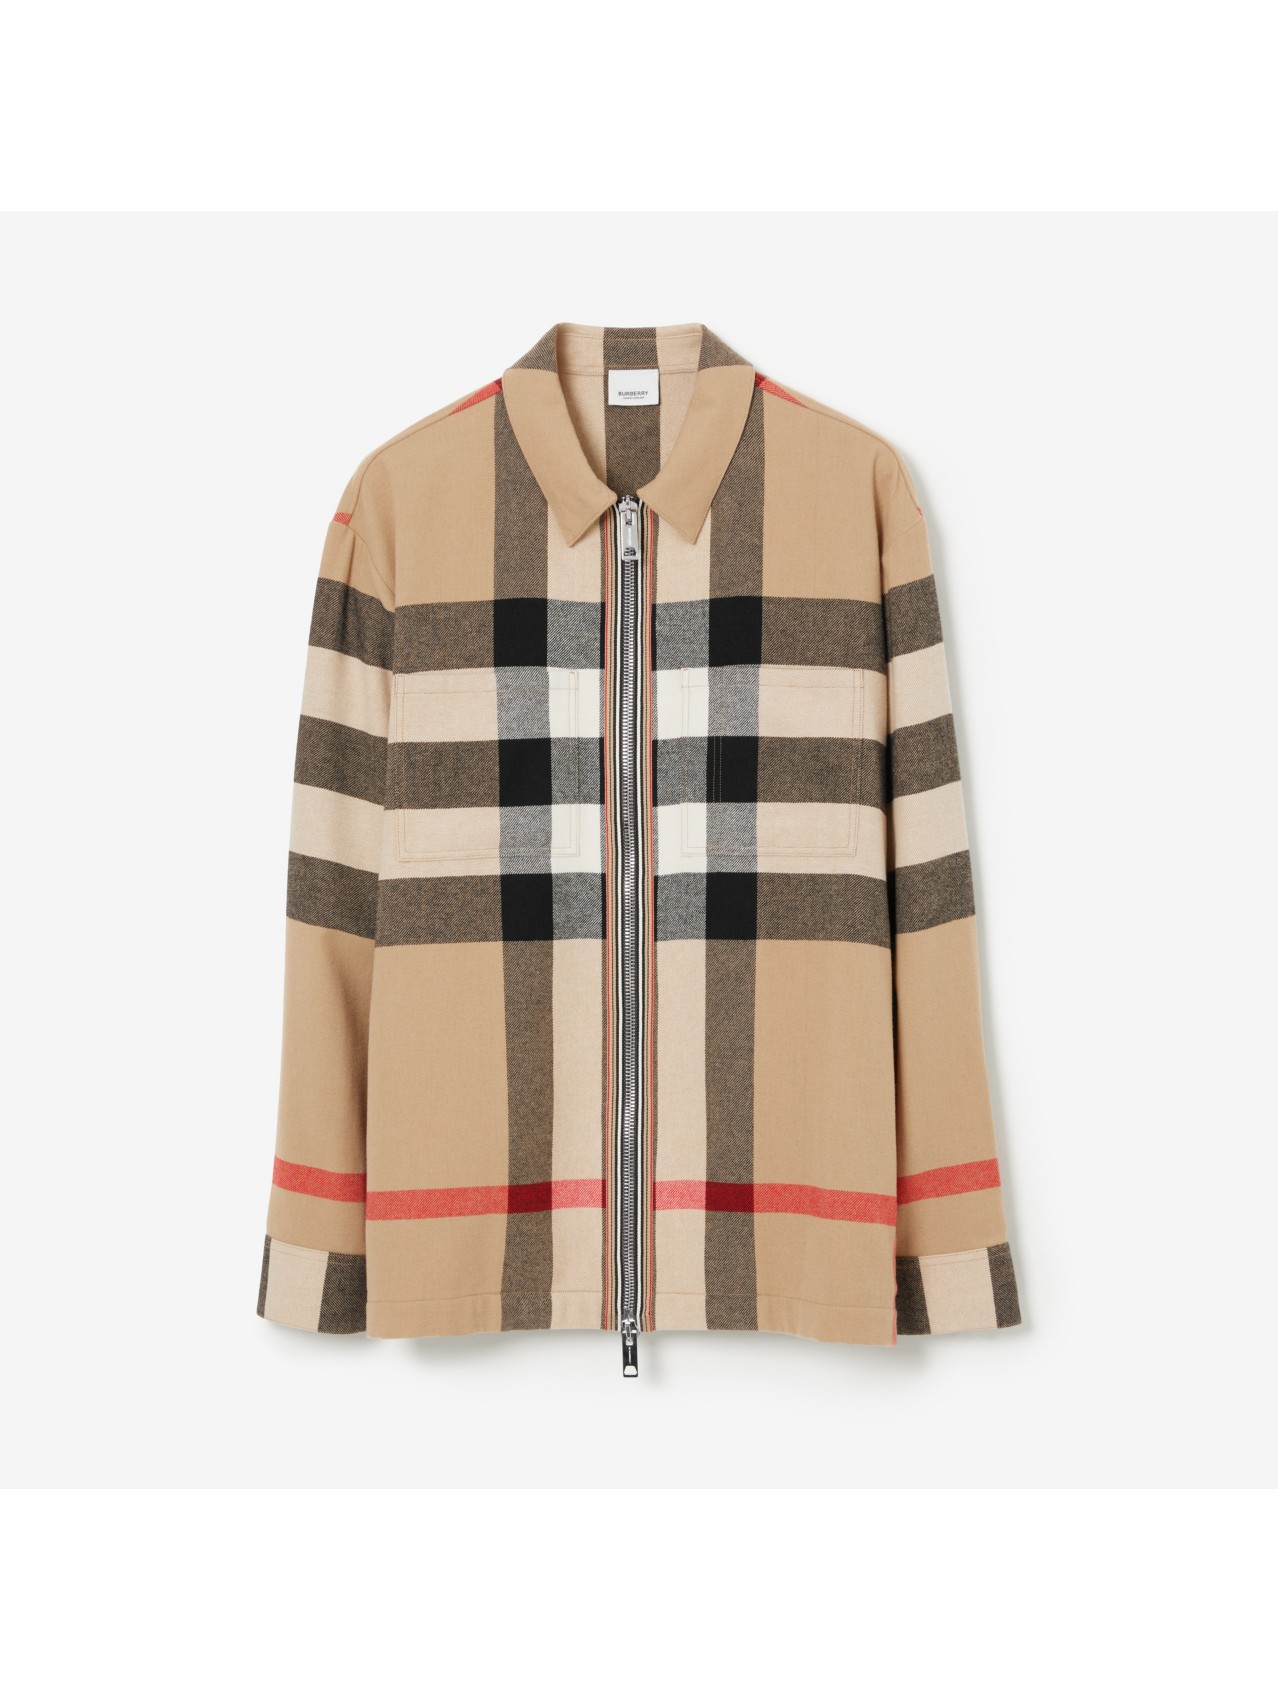 Men's Jackets | Hooded & Bomber Jackets | Burberry®️ Official